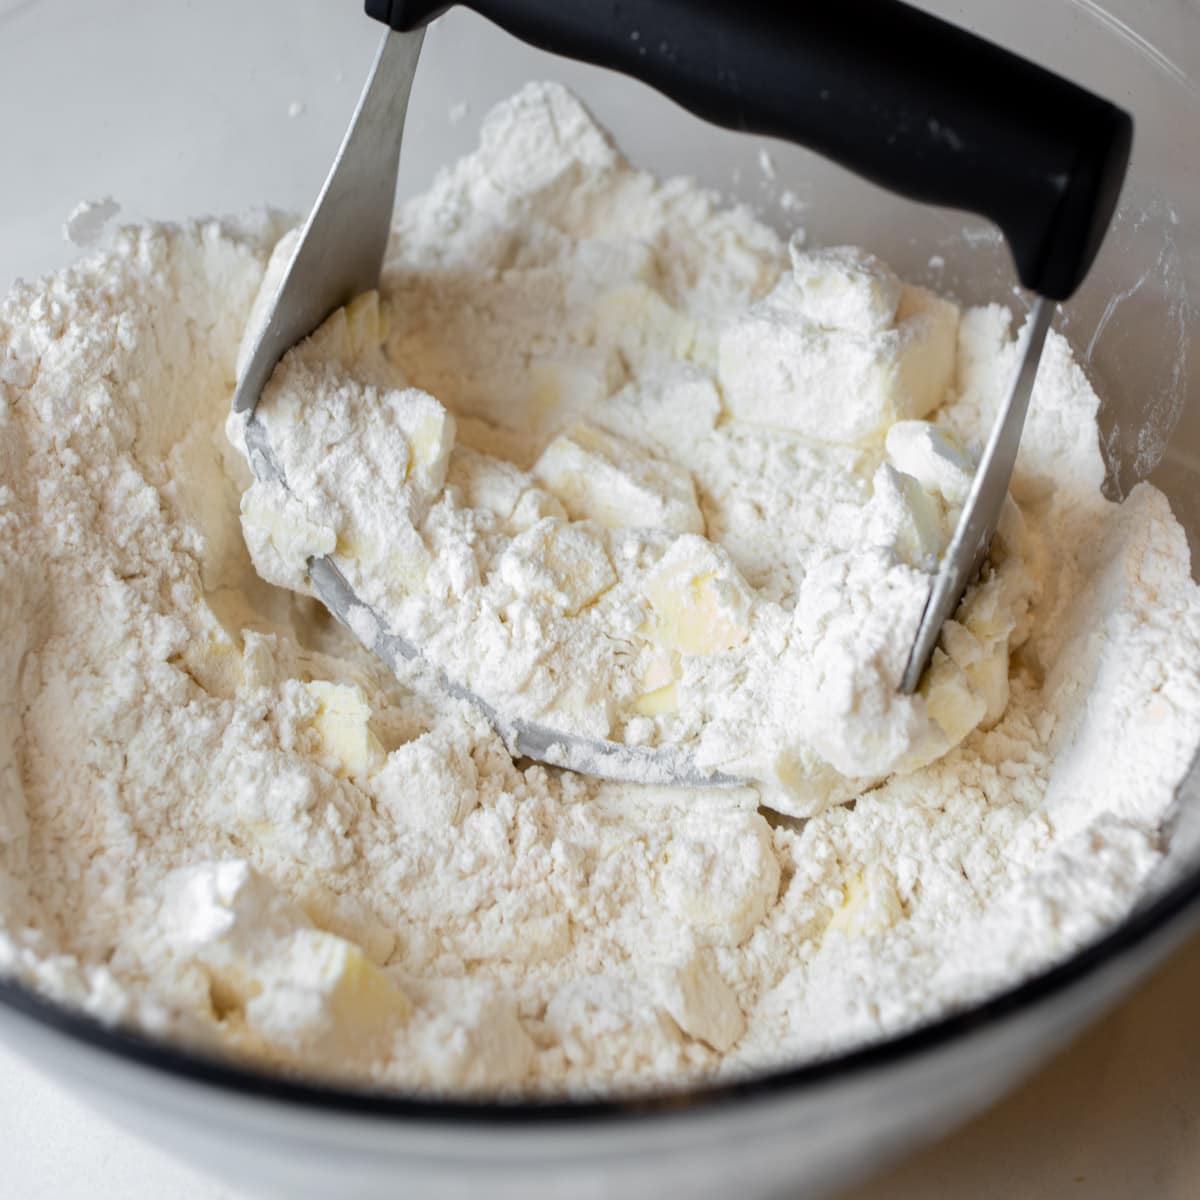 Butter being cut into flour in a bowl.